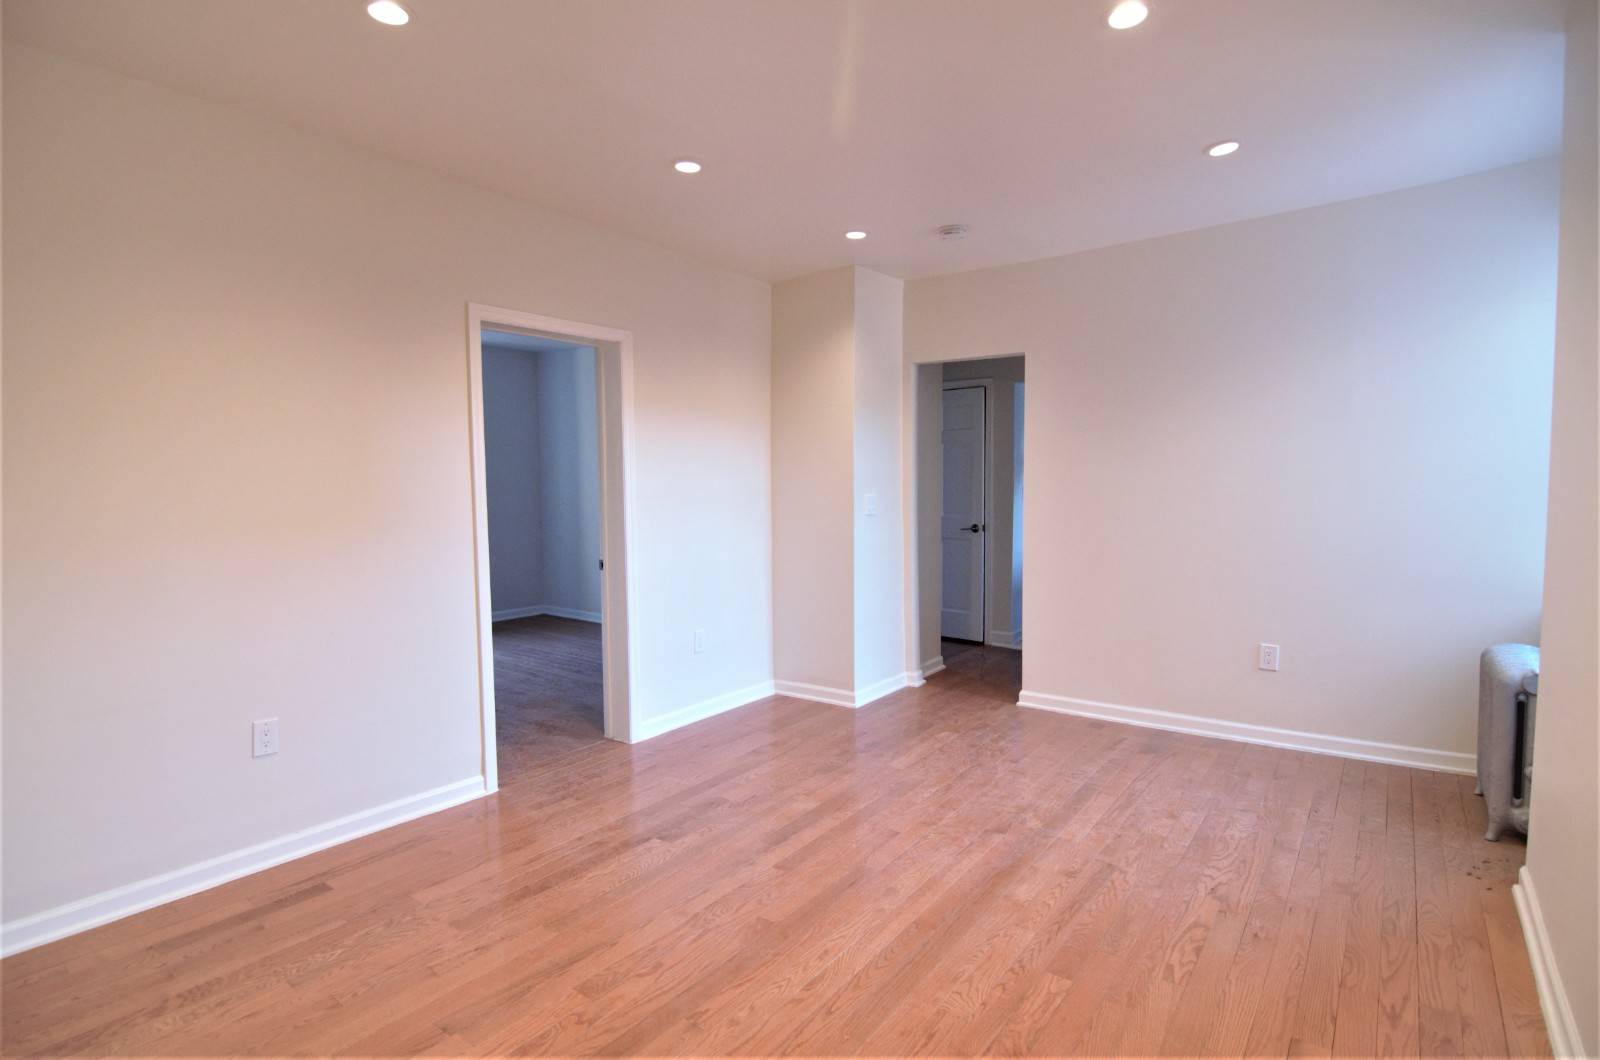 APARTMENT FEATURES Stainless Steel Appliances Granite Counters Dishwasher Microwave Hardwood Floors Renovated BathroomThis excellent Sunnyside location gives you easy access to the 7 line and is a quick ride to ...